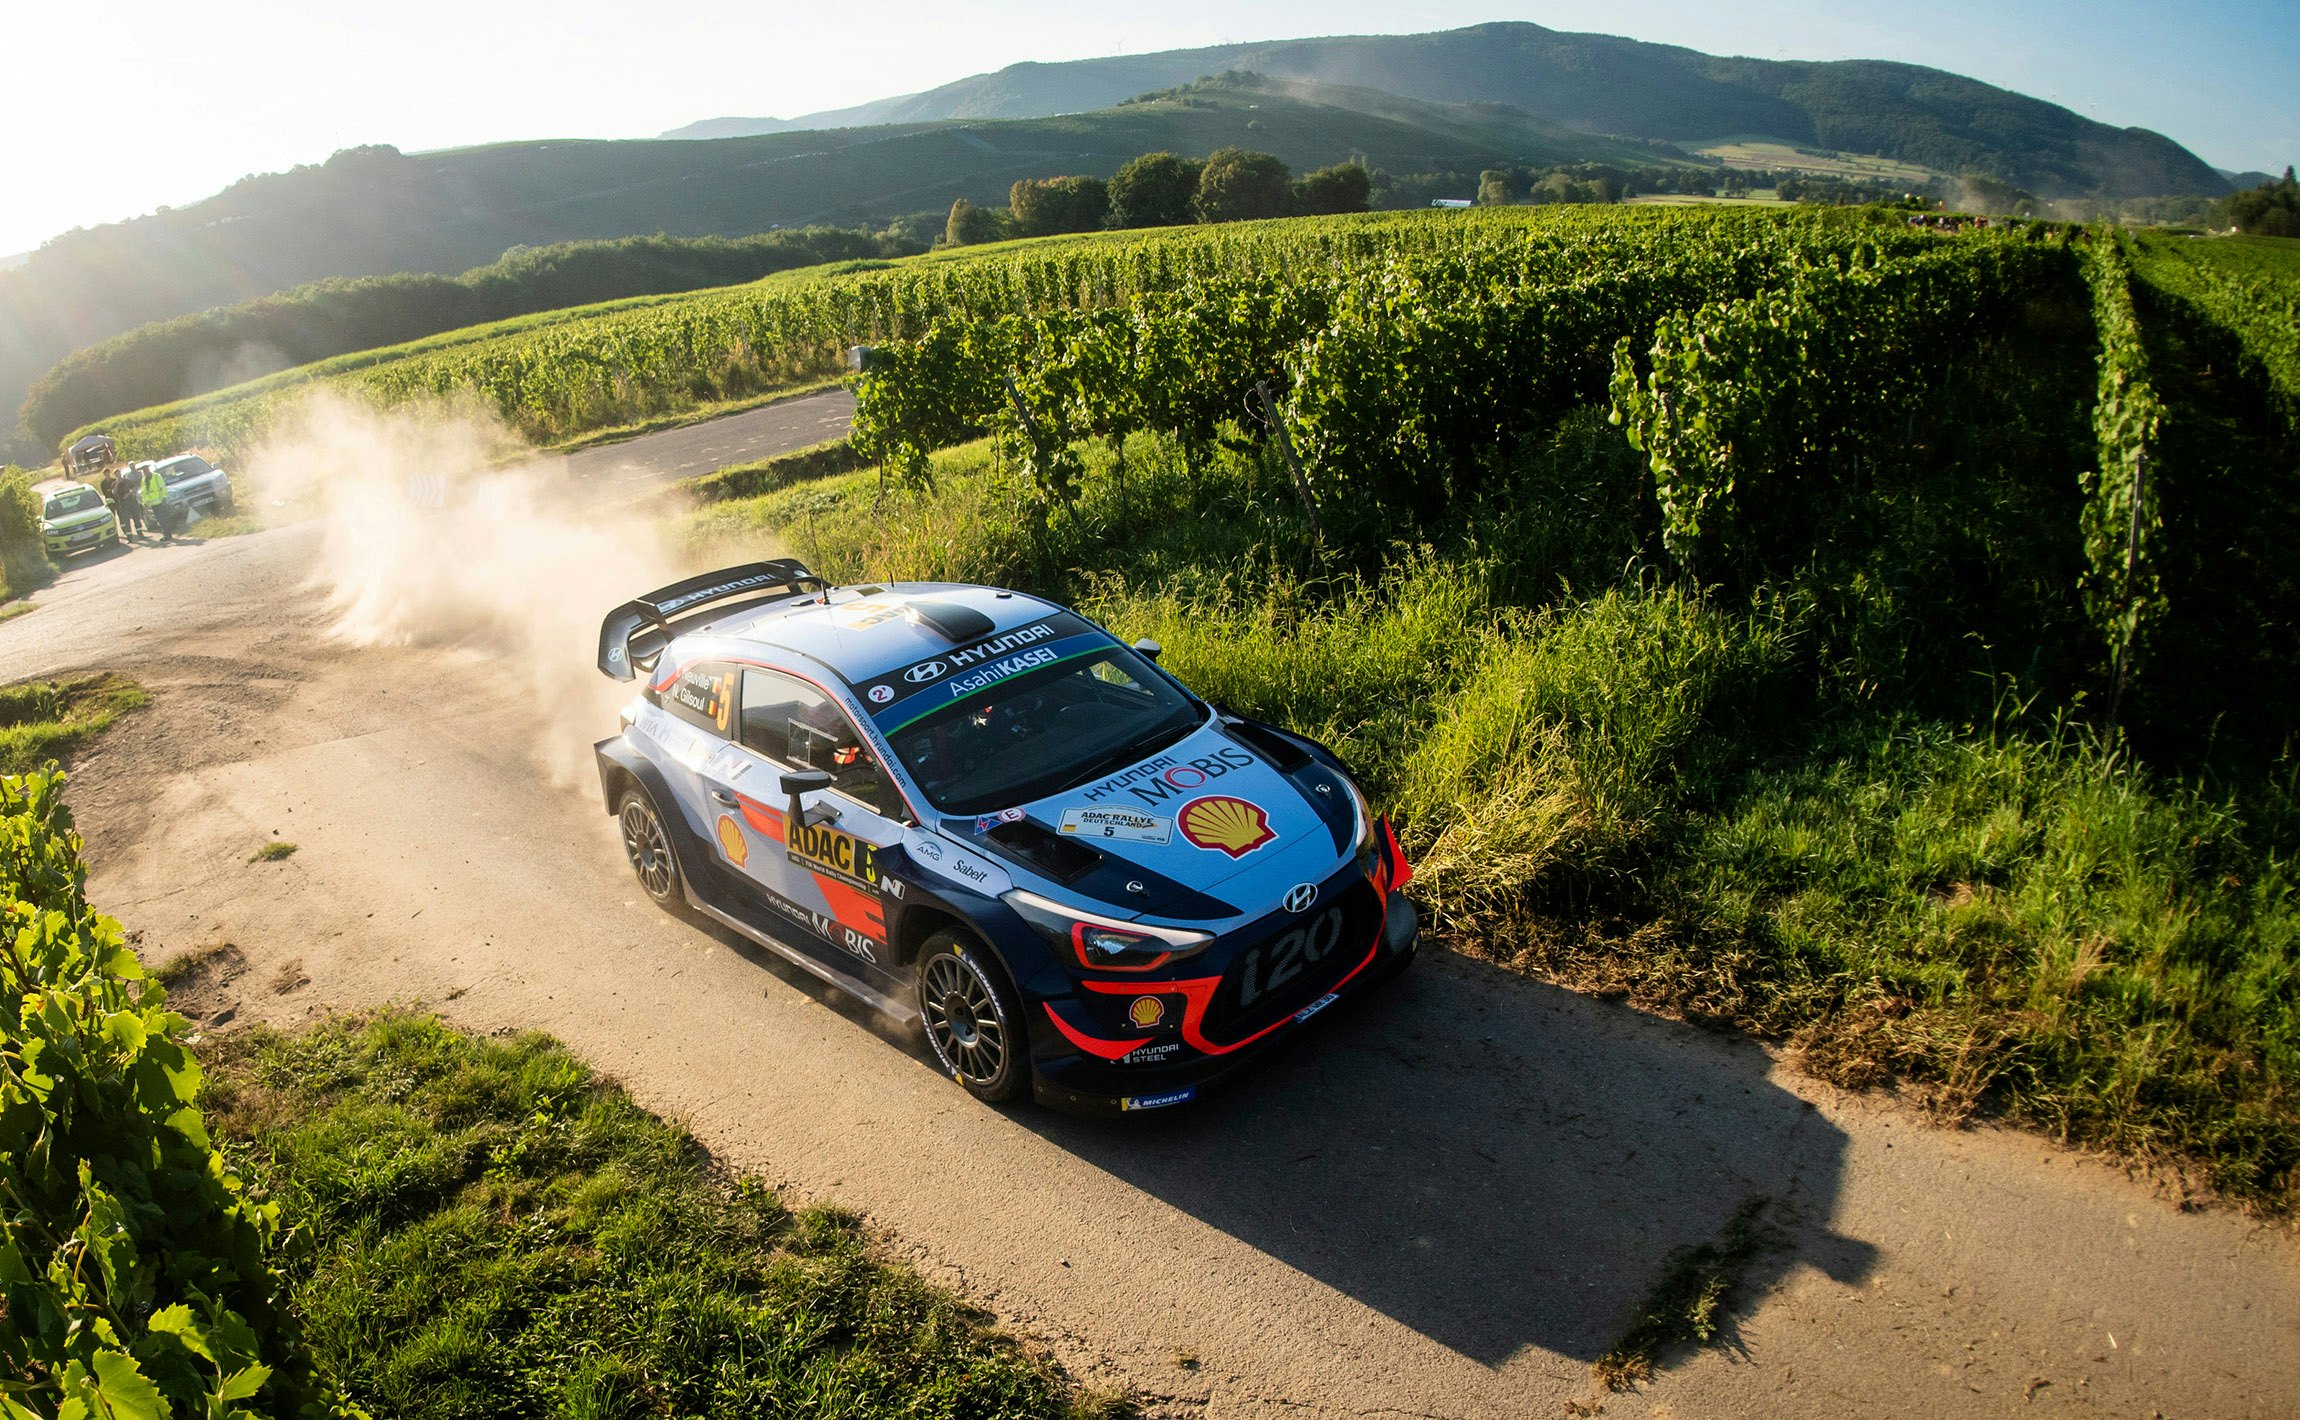 Thierry Neuville (BEL) performs during FIA World Rally Championship 2018 in Saarland, Germany on August 19, 2018 // Jaanus Ree/Red Bull Content Pool // AP-1WMVRZKUD2111 // Usage for editorial use only // Please go to www.redbullcontentpool.com for further information. //